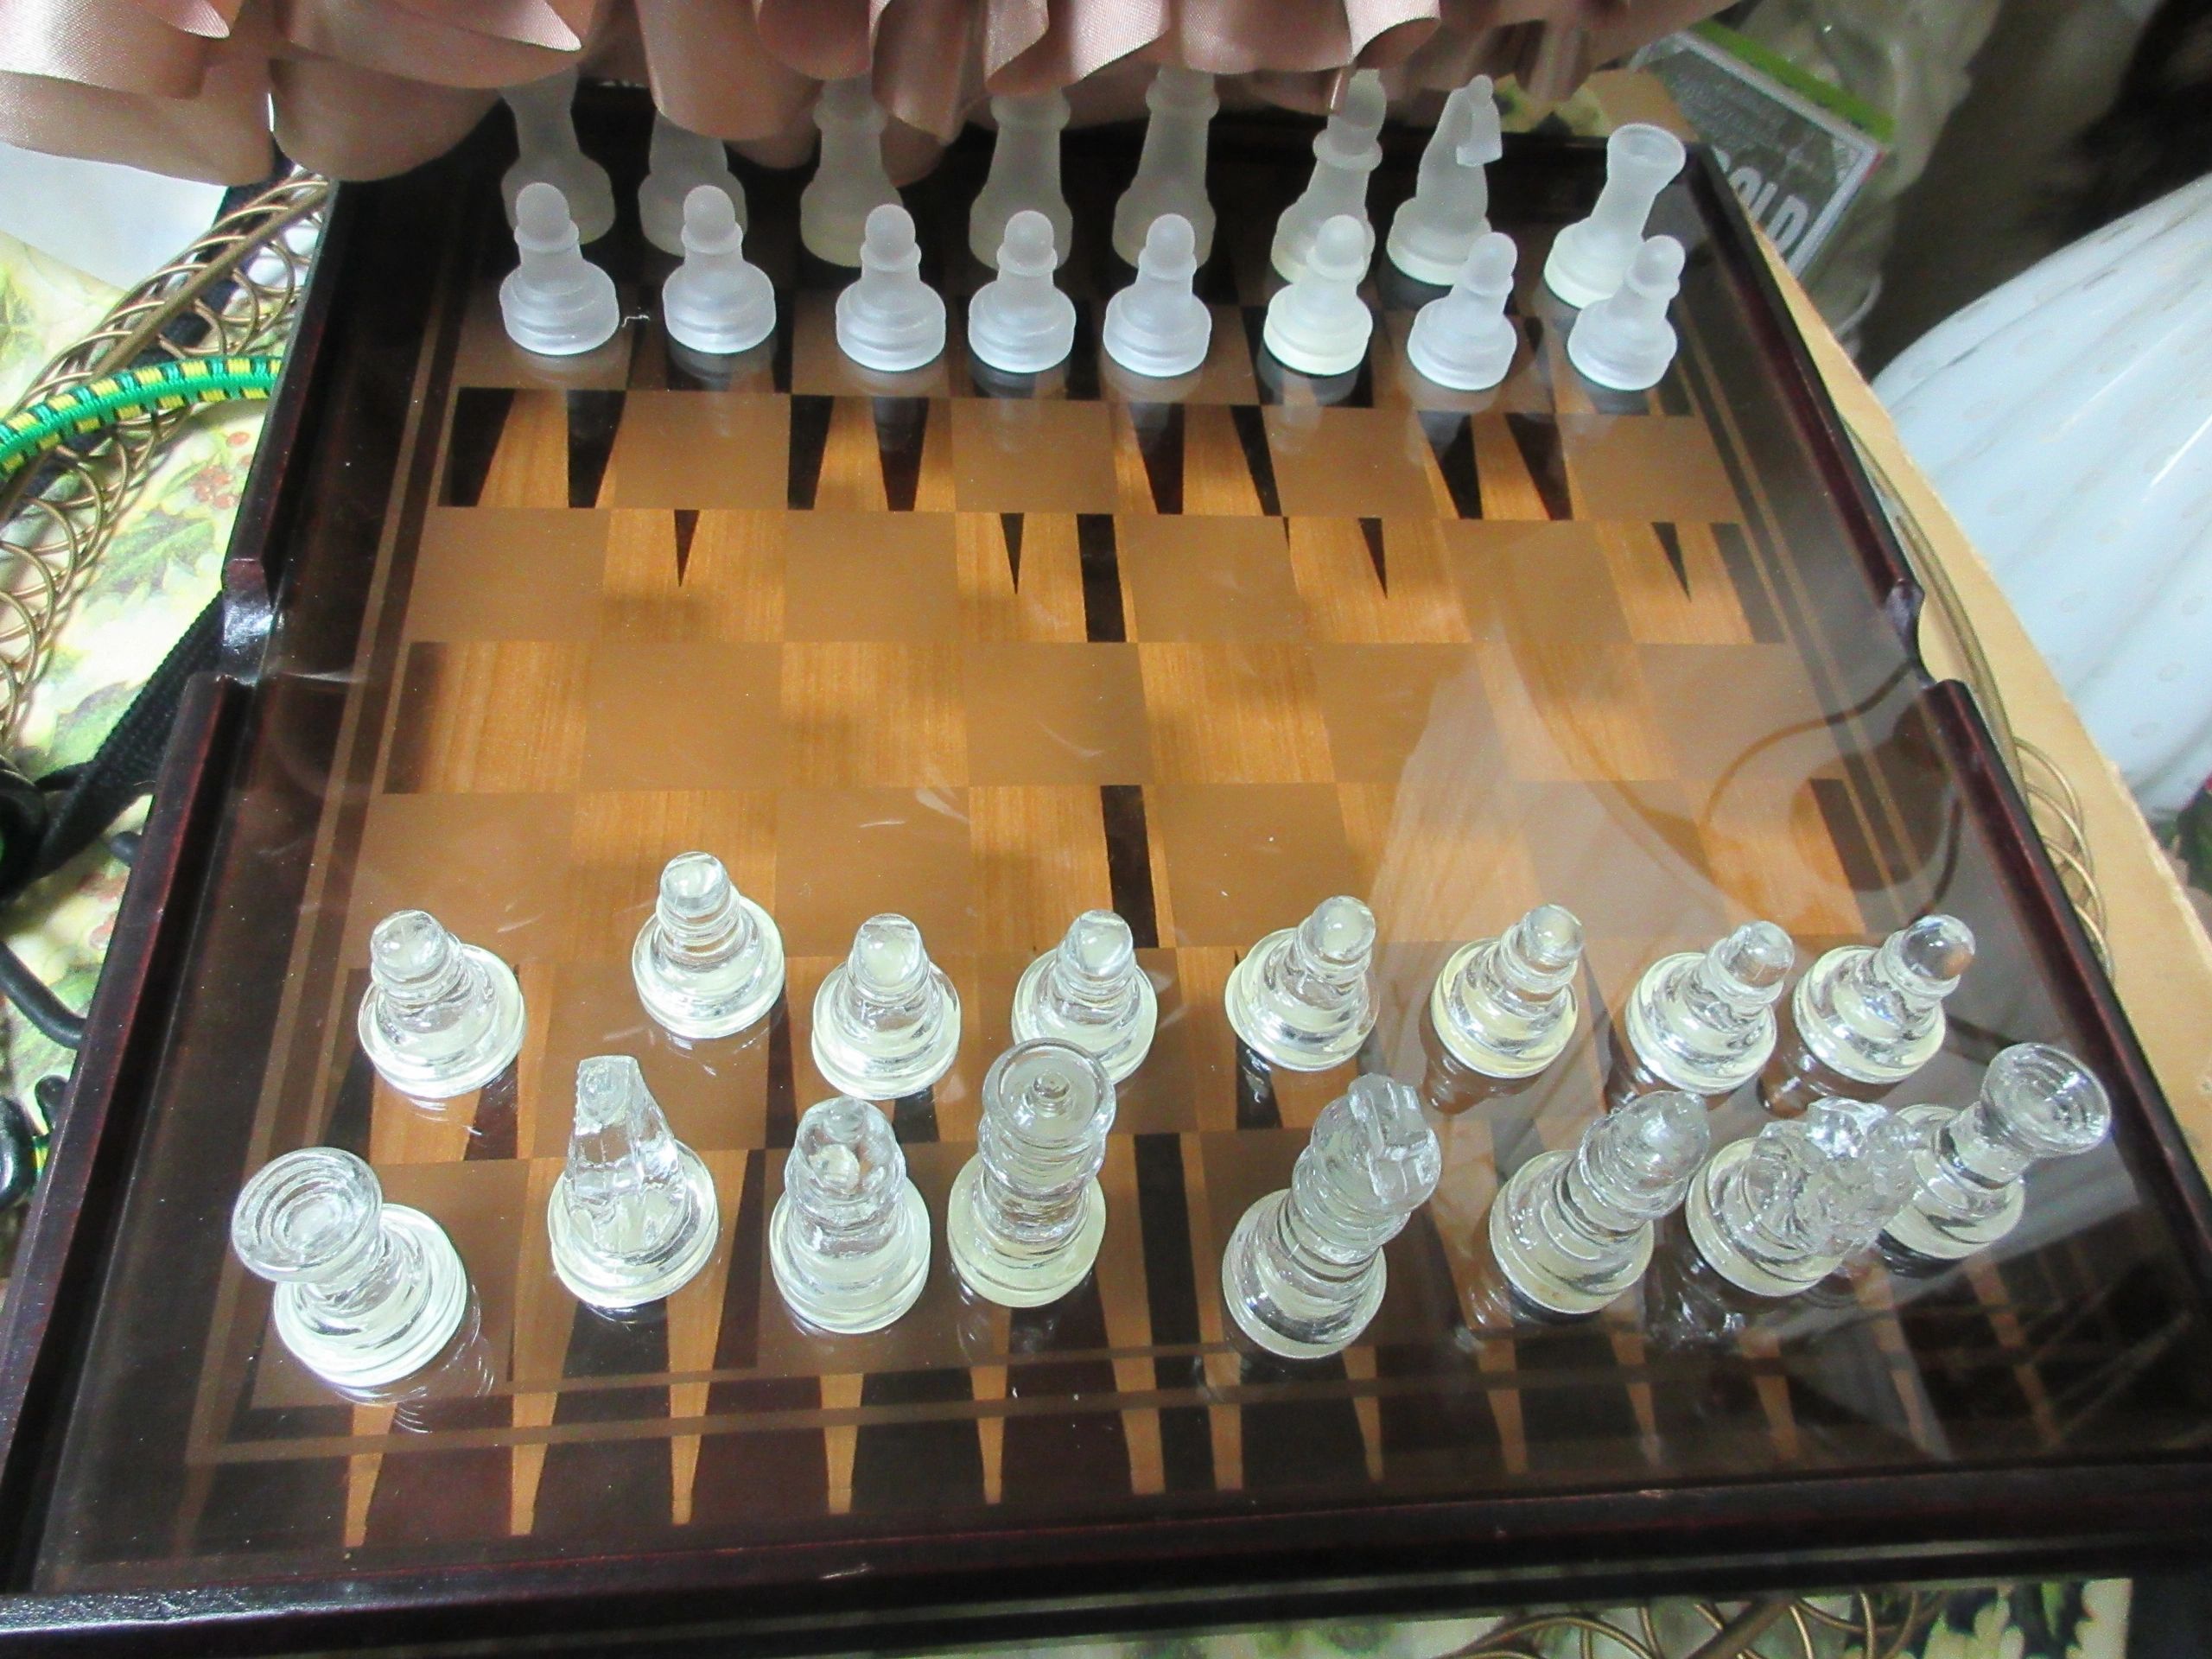 glass chess set with wooden case